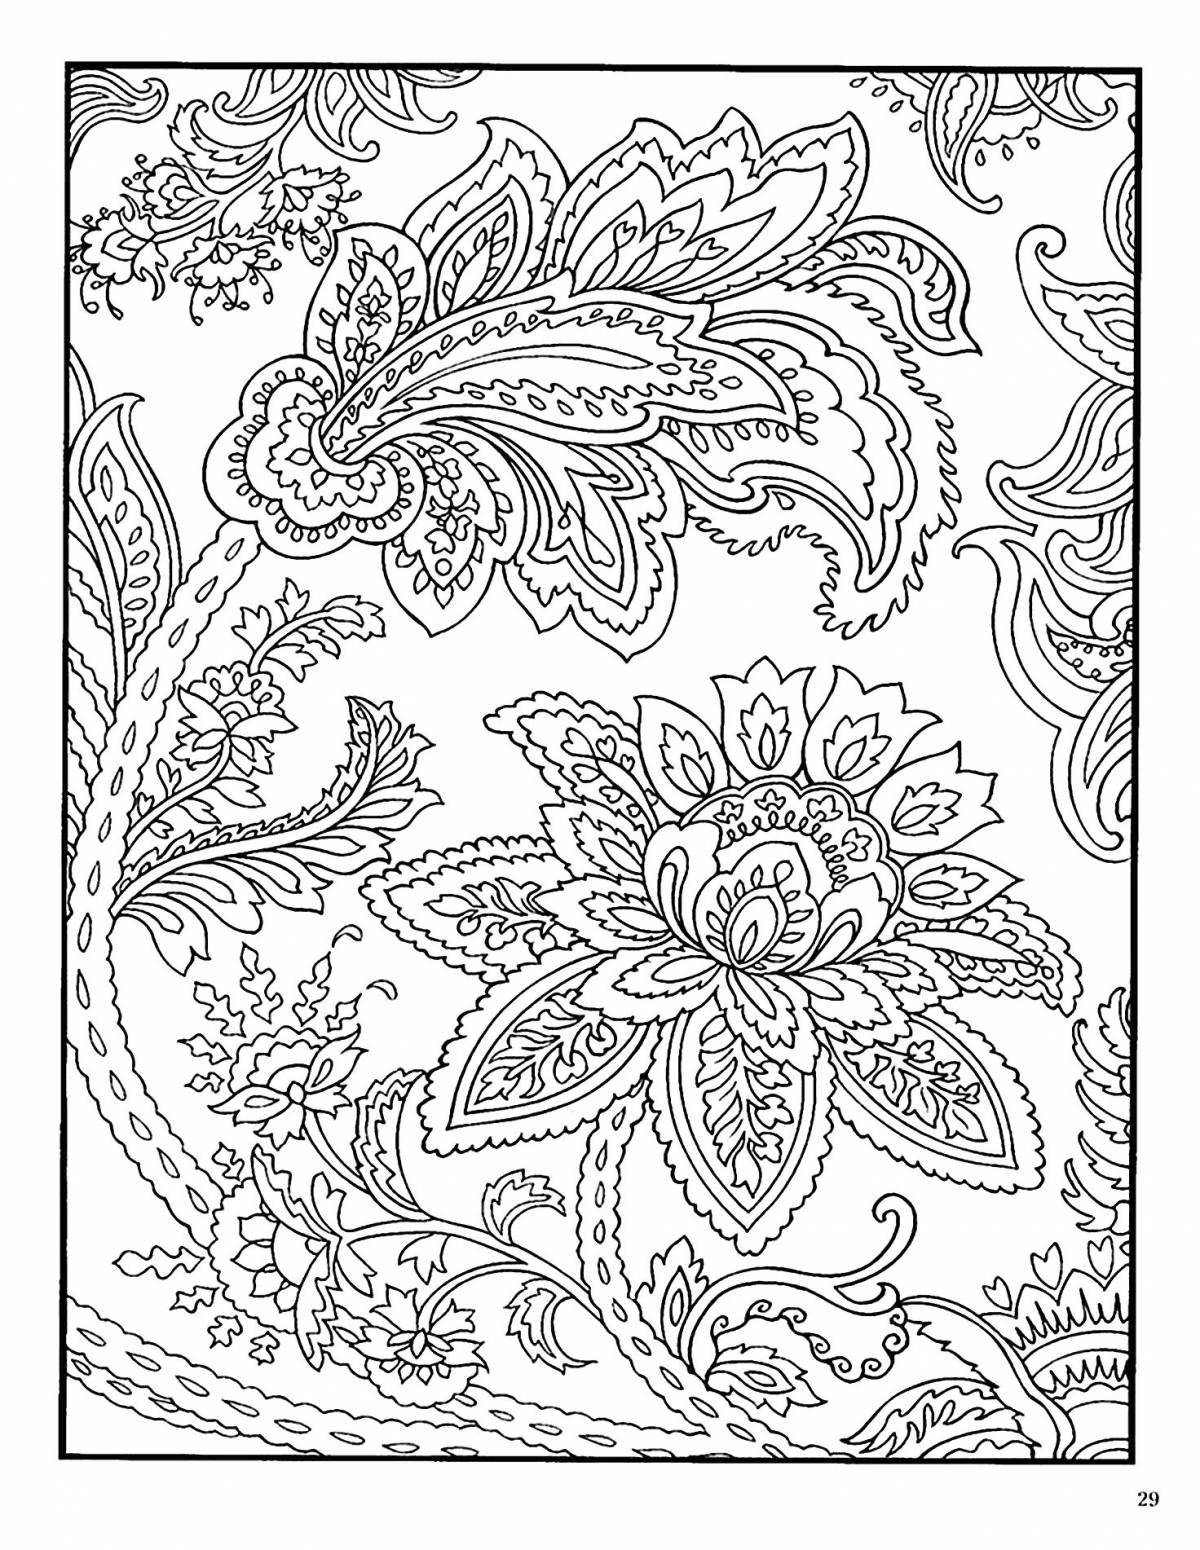 Comforting coloring templates